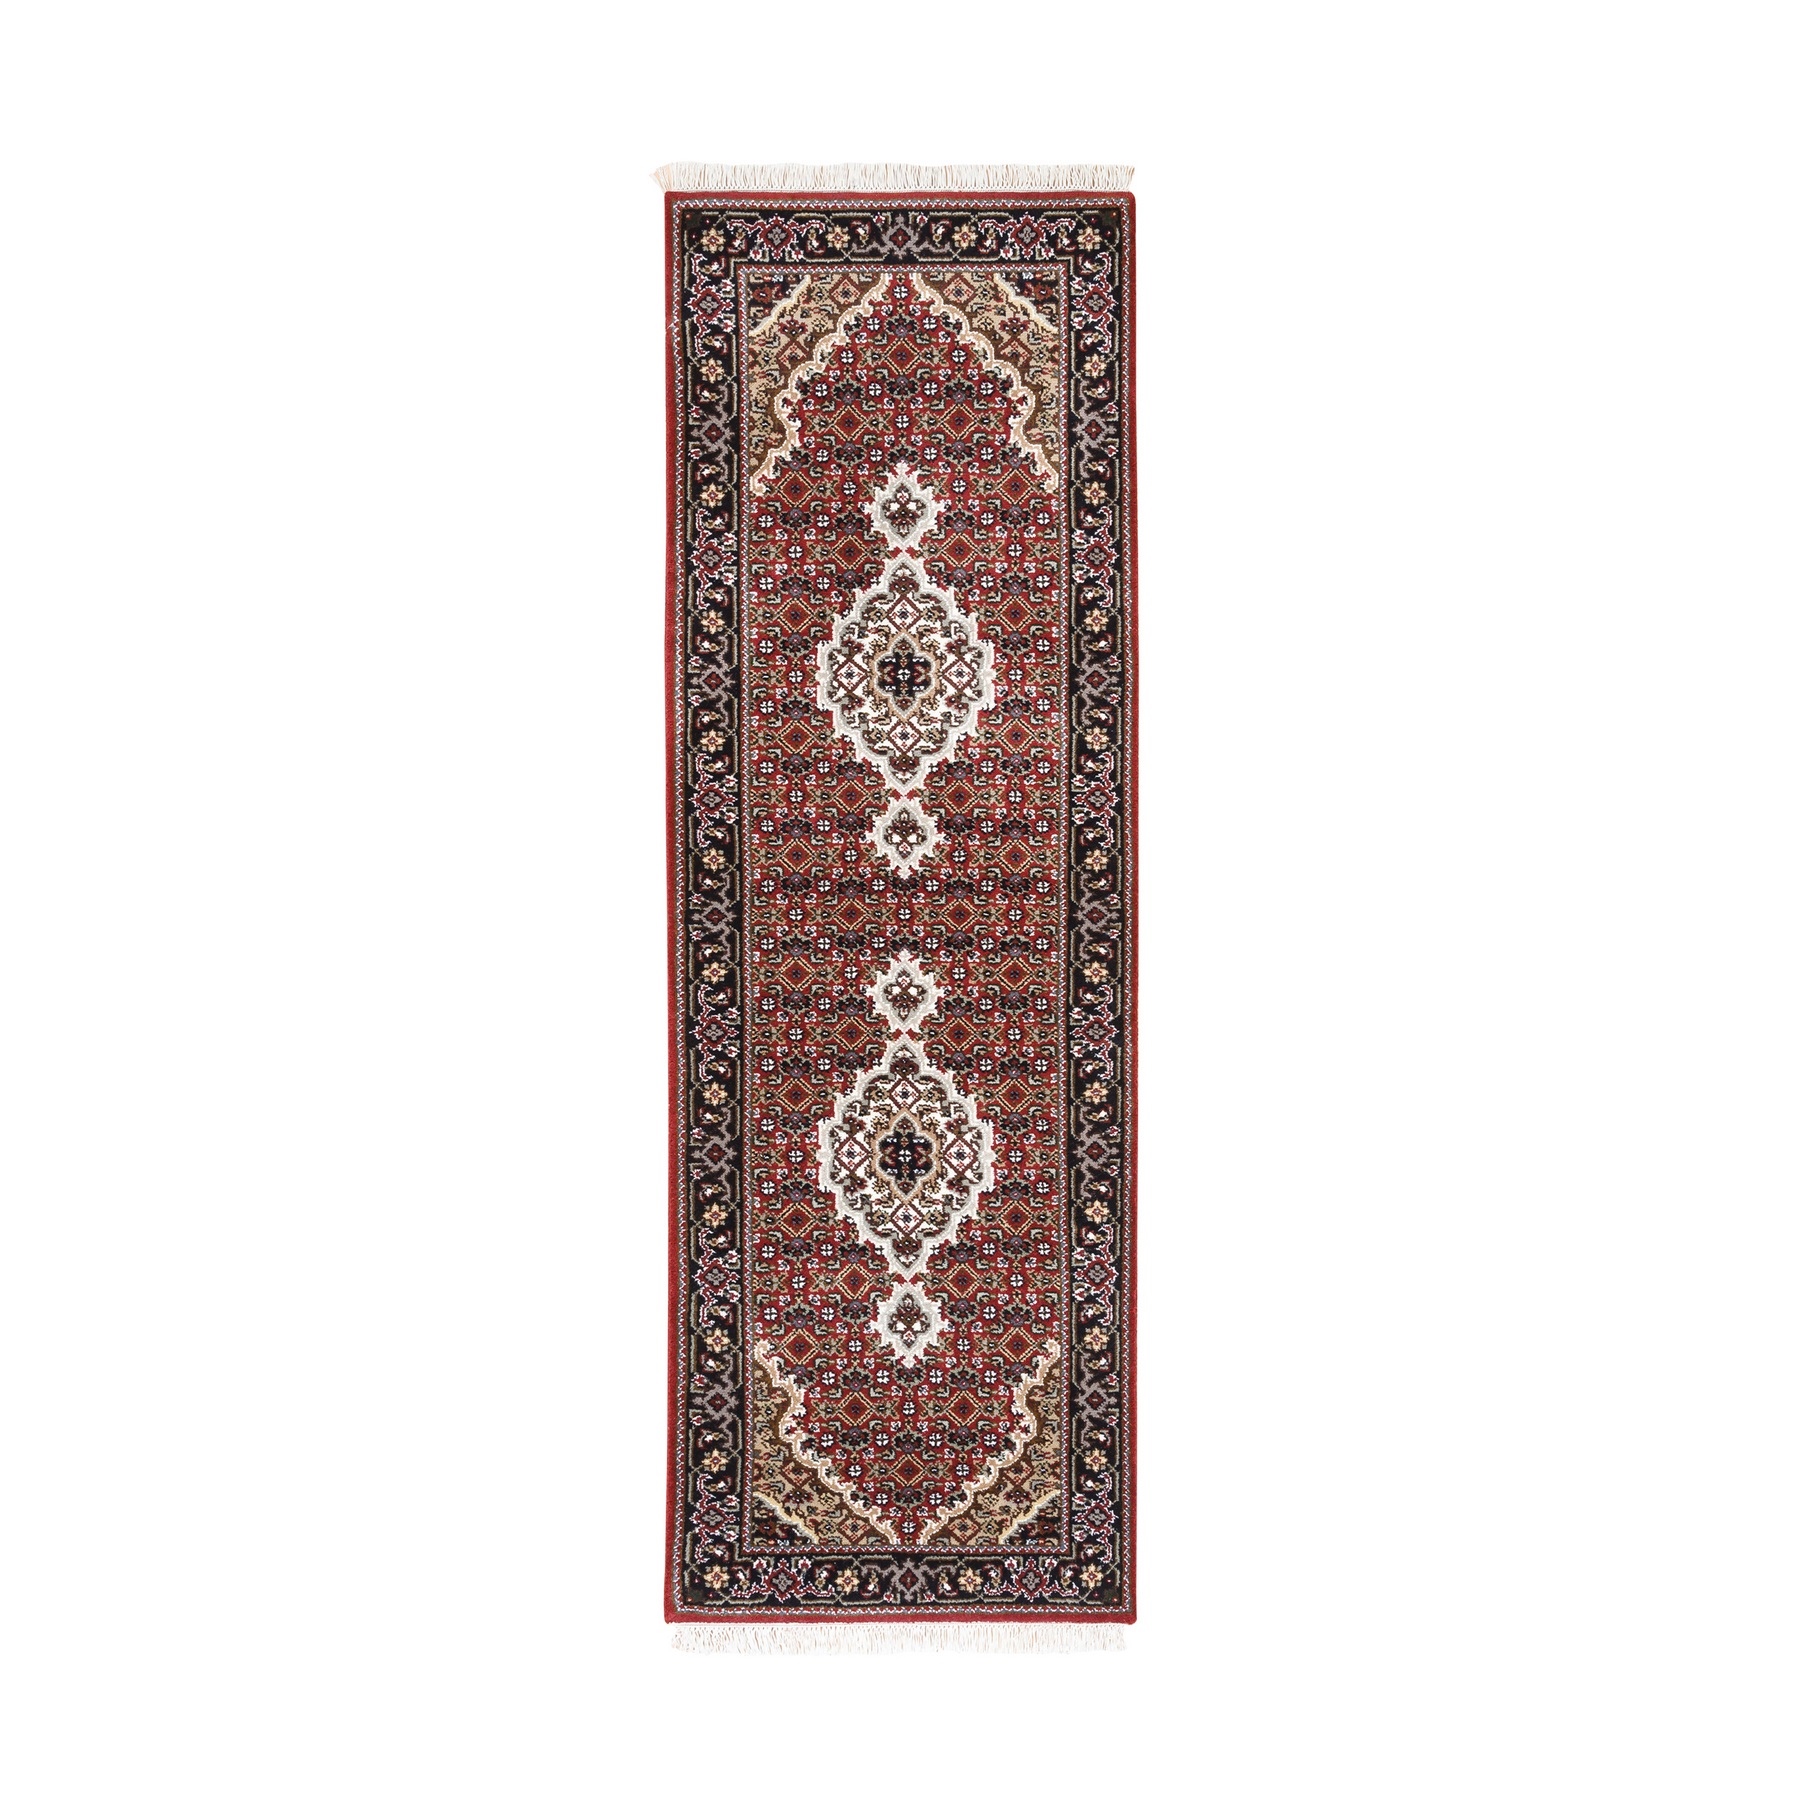 Pirniakan Collection Hand Knotted Red Rug No: 1124926